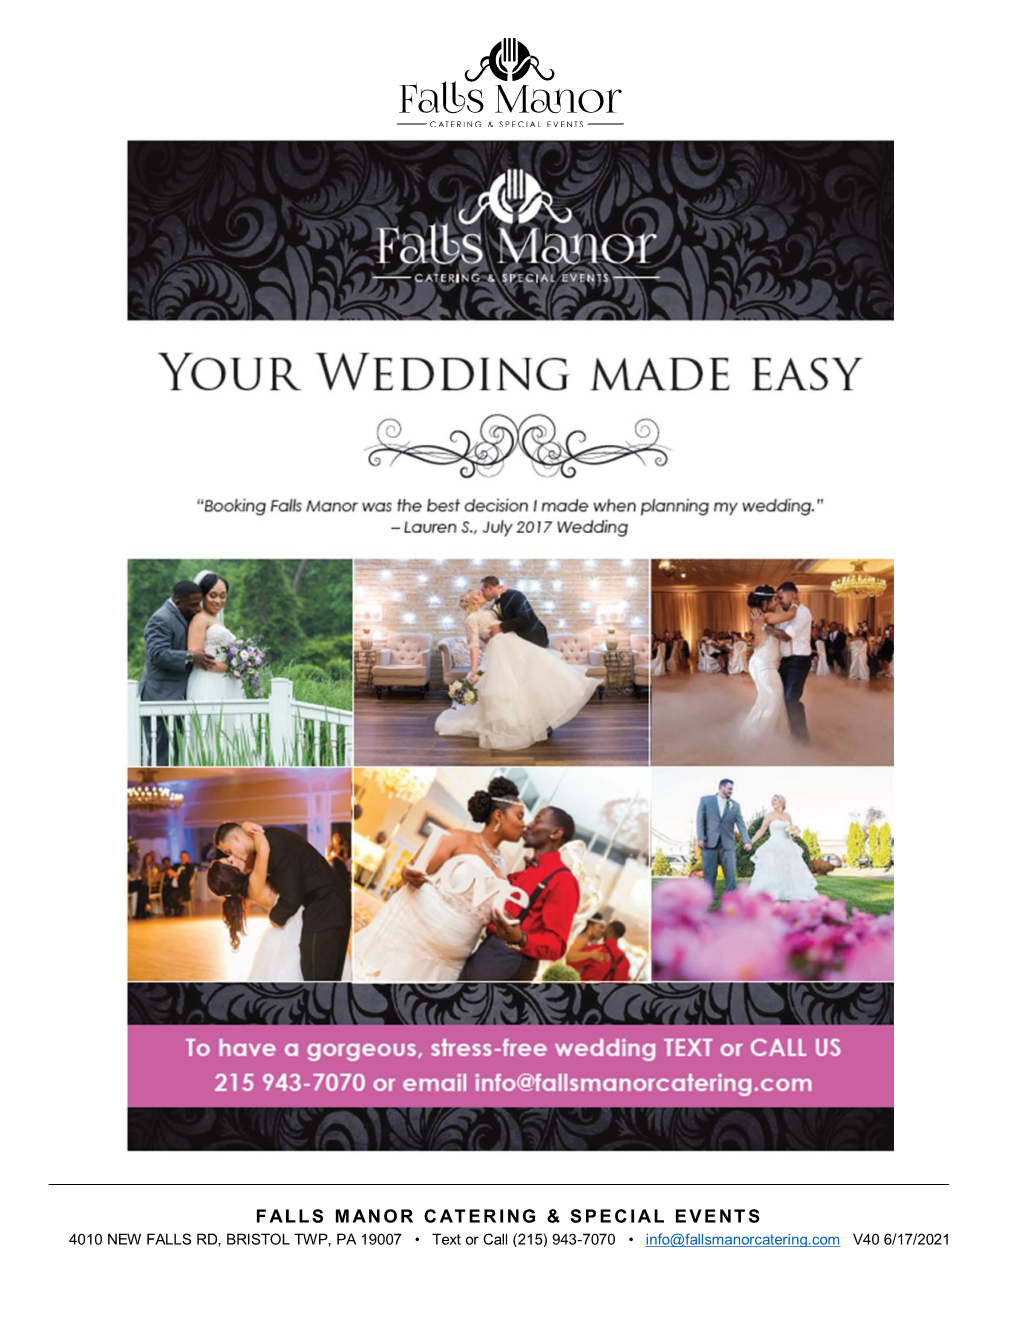 Falls Manor Catering & Special Events